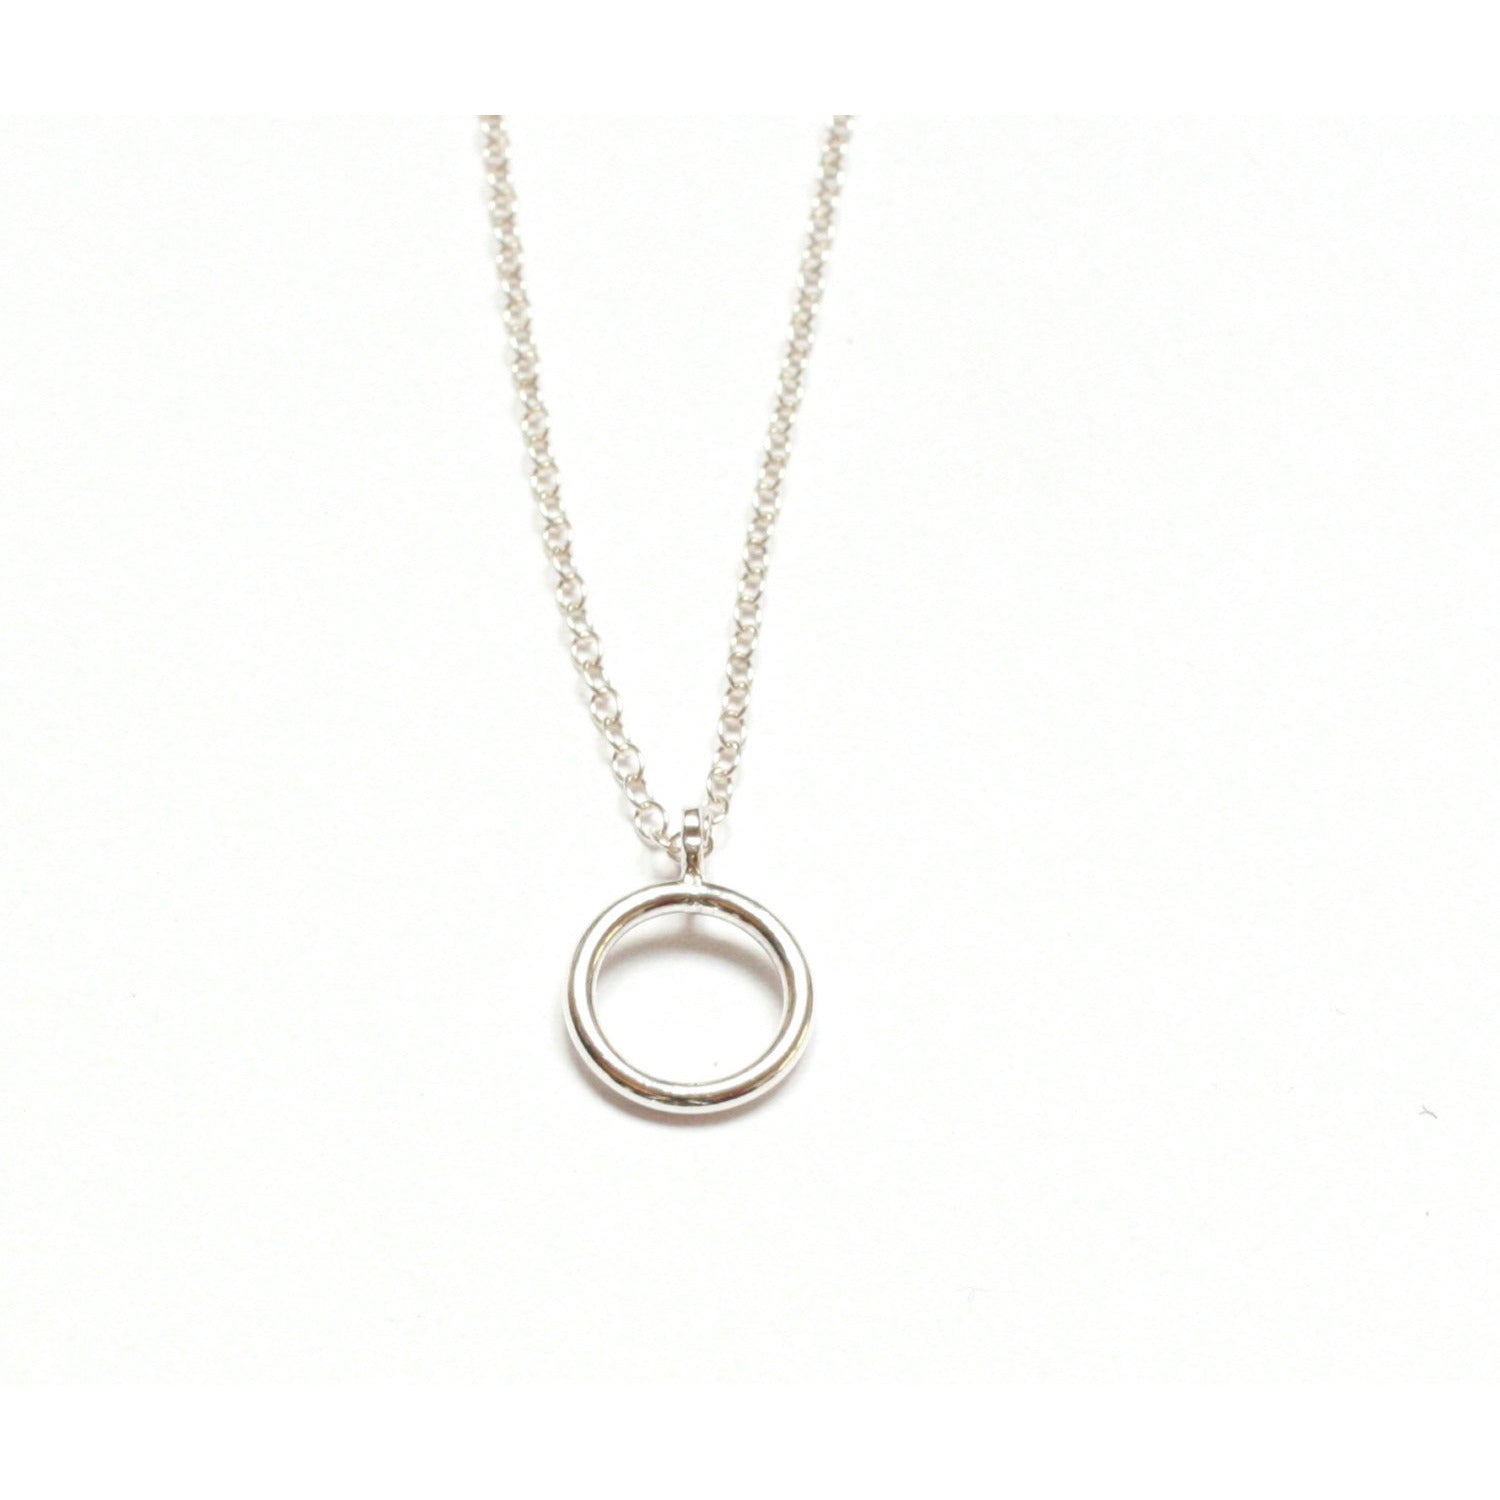 Handmade Sterling Silver Day Collar with Discreet Petite Necklace and O Ring - Versatile Unisex Design